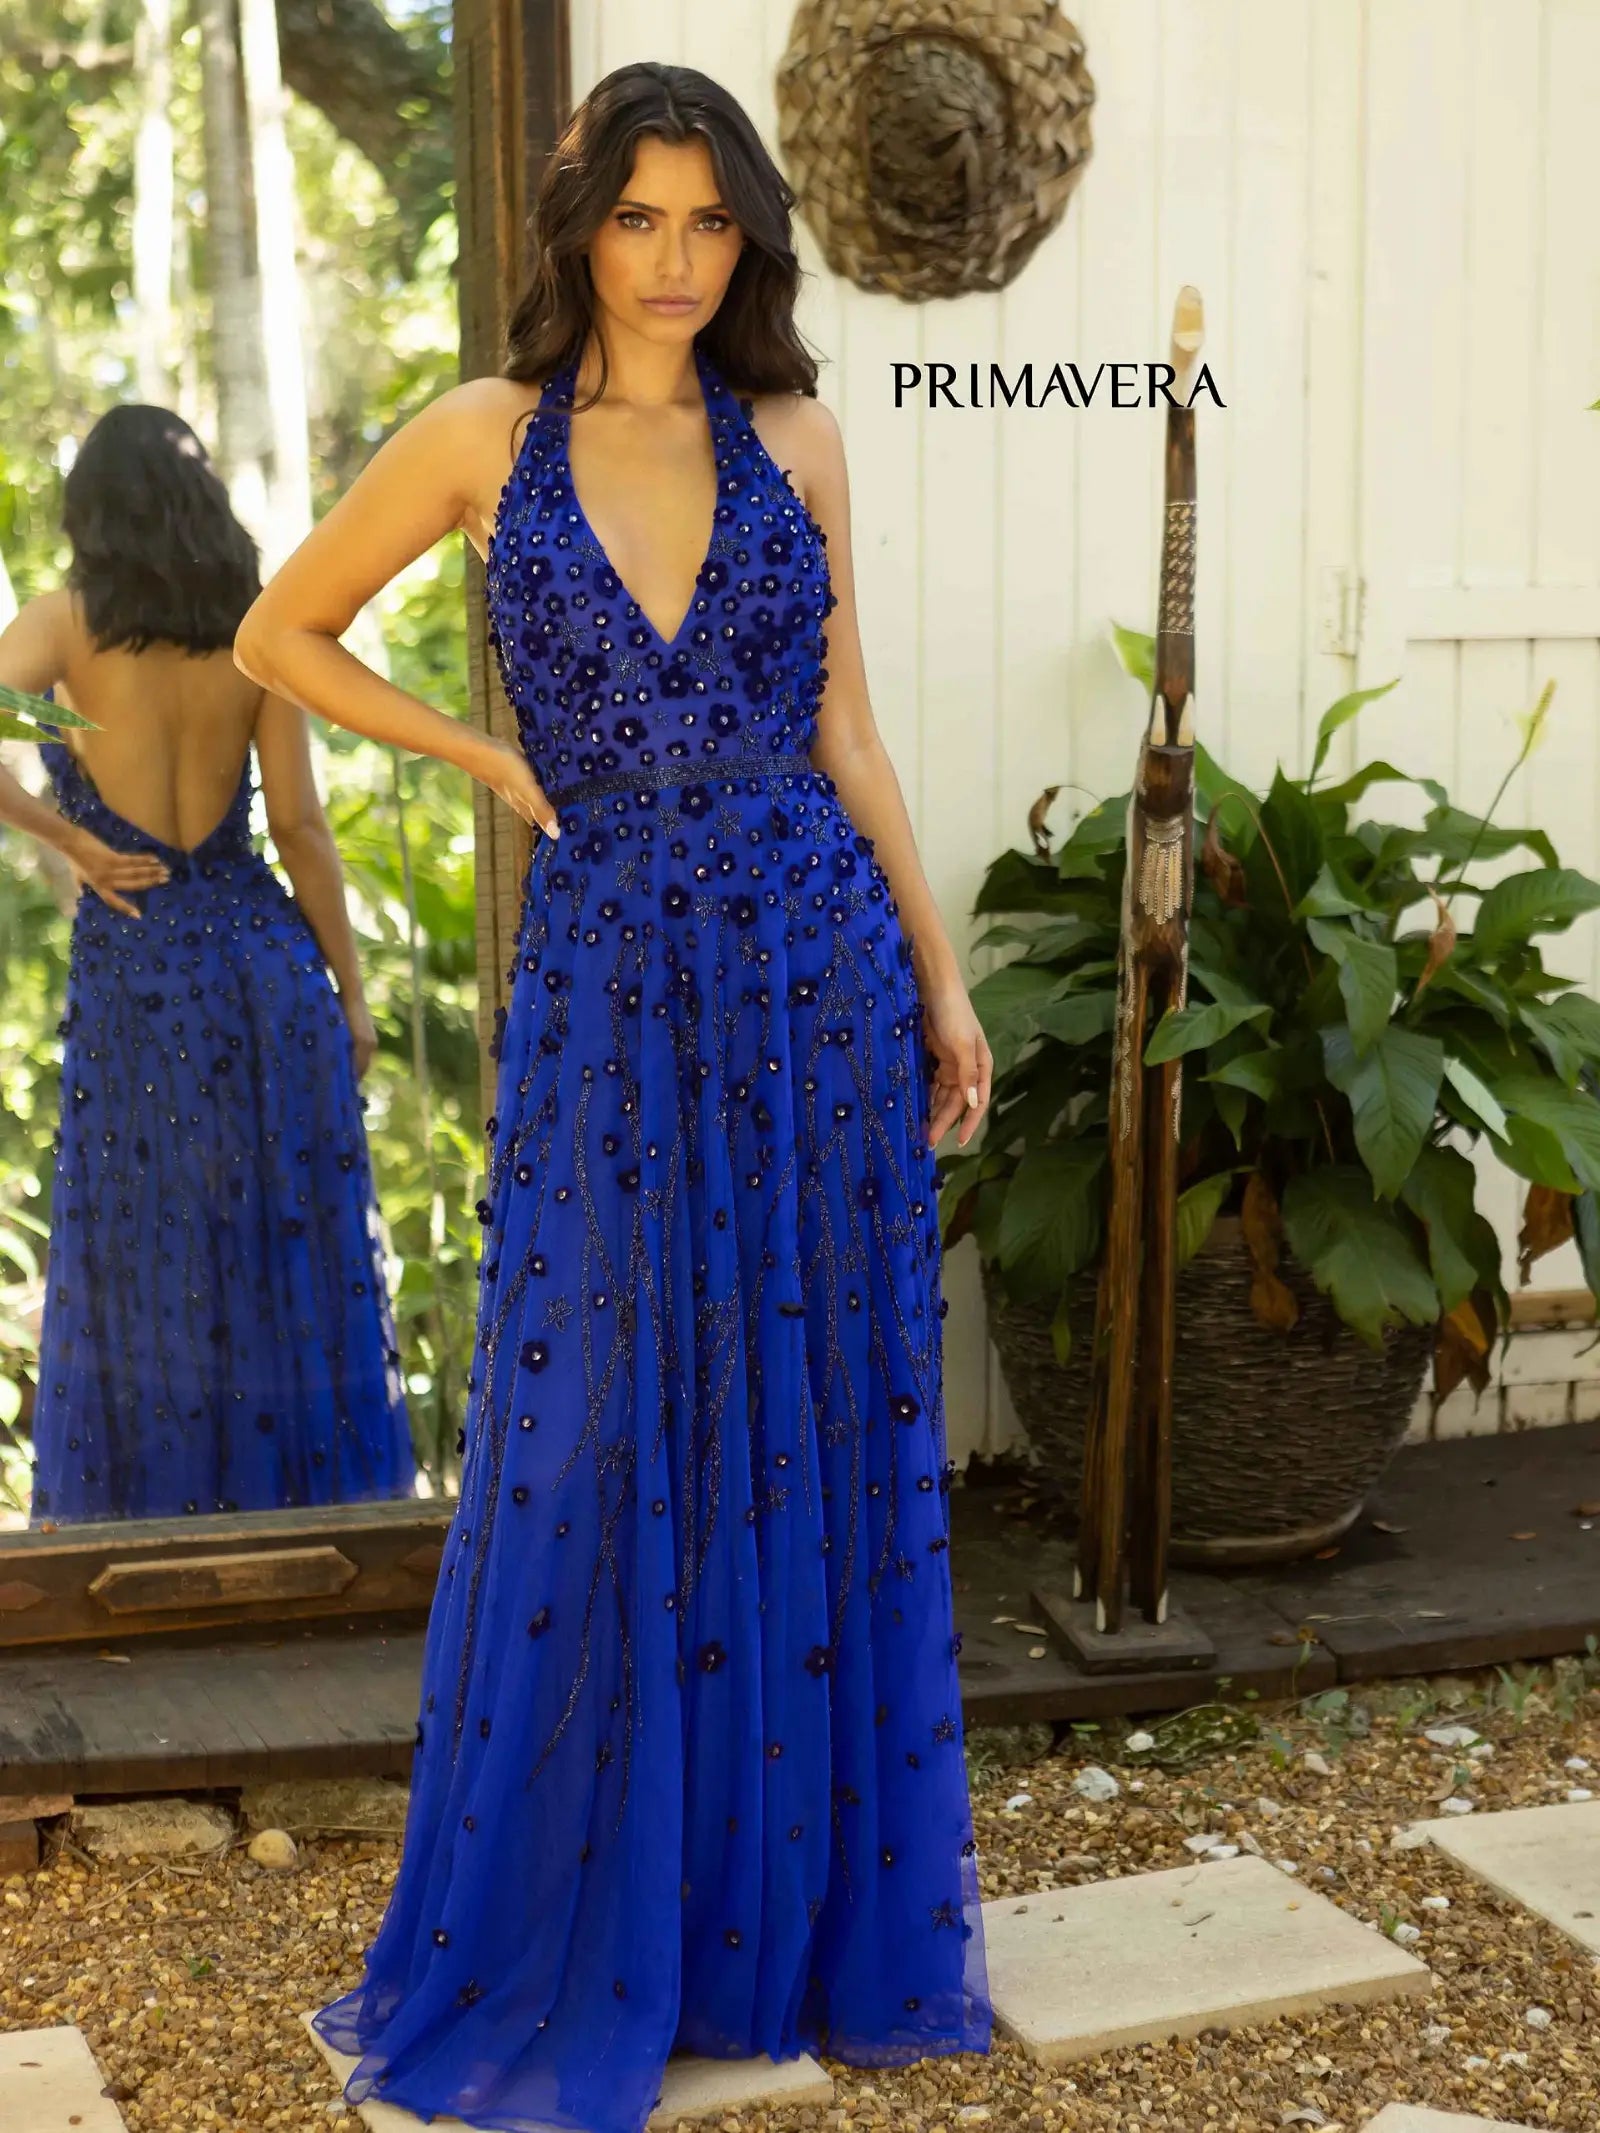 Primavera Couture 12055 Prom Dress Long Beaded Gown. Such a beautiful ballgown with 3D flowers. 